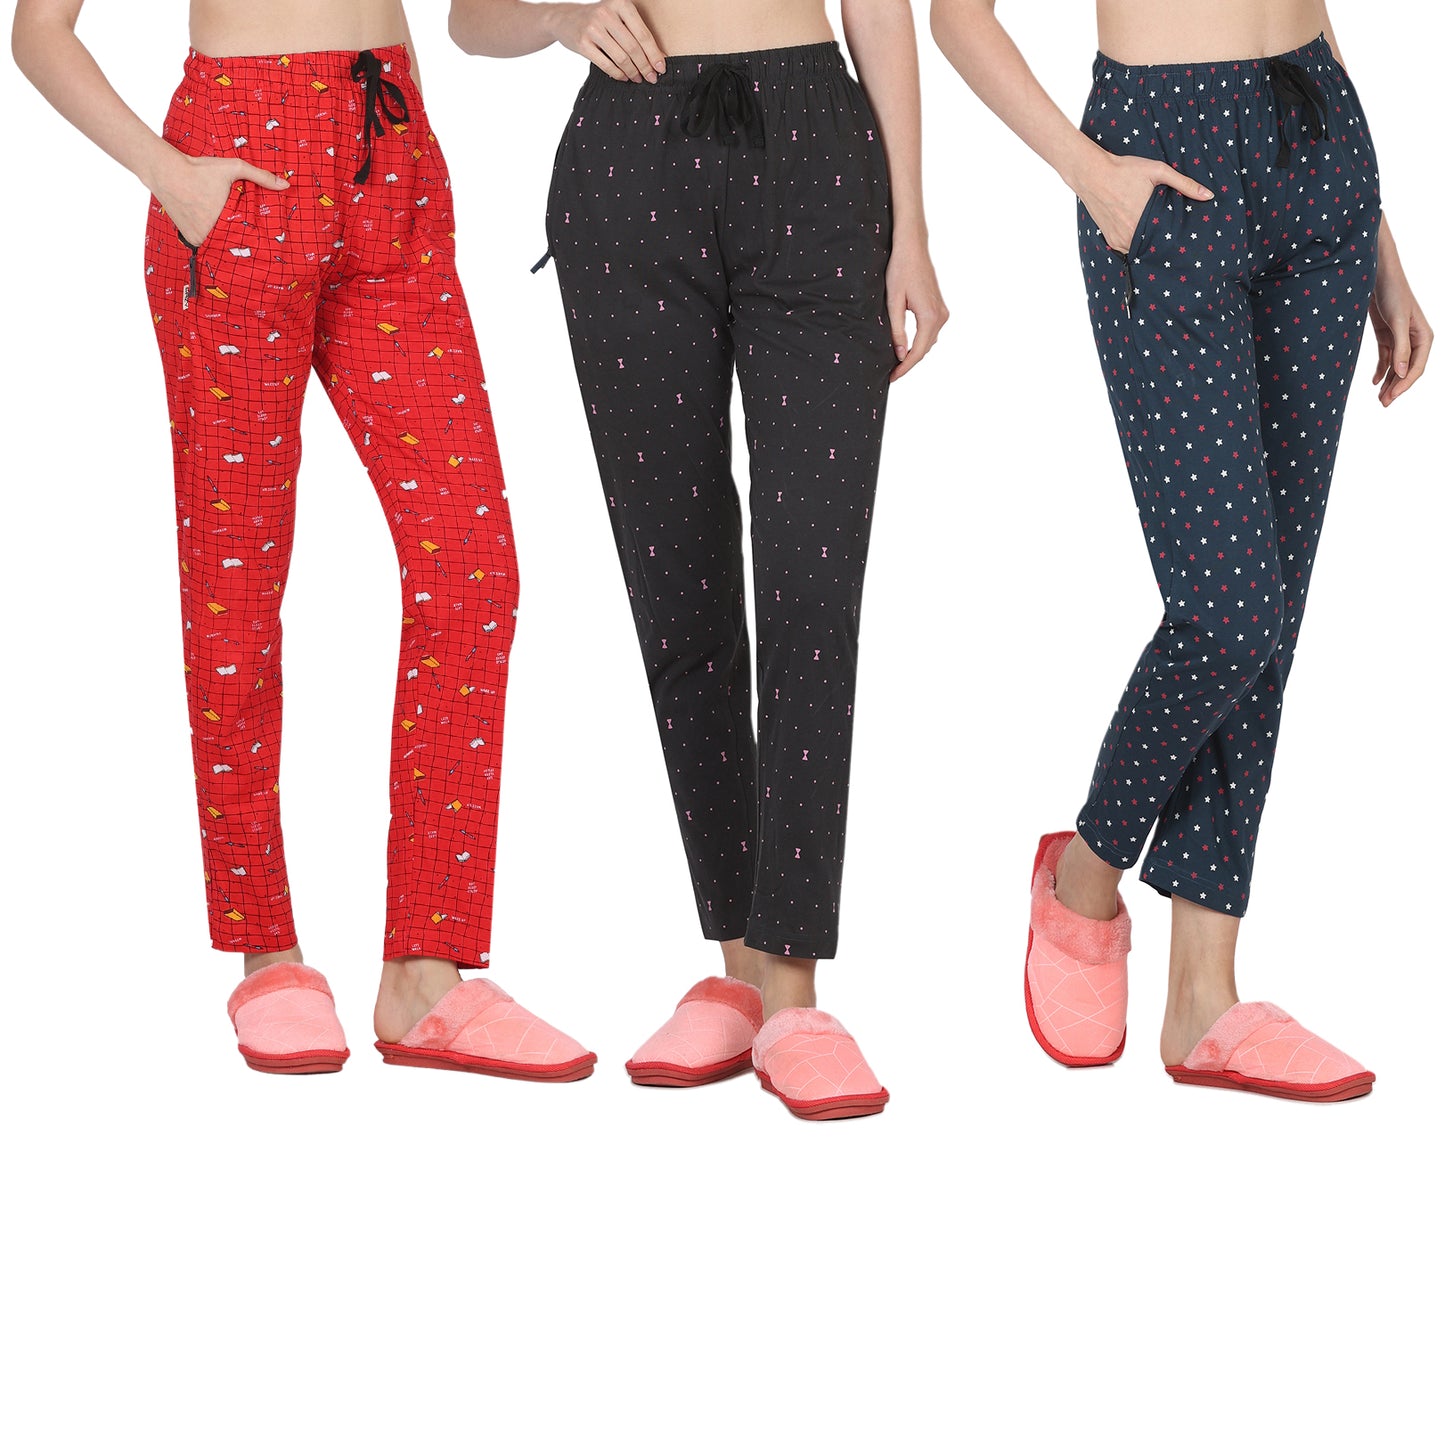 Eazy Women's Printed Lower - Pack of 3 - Bright Red, Charcoal Grey & Pine Green